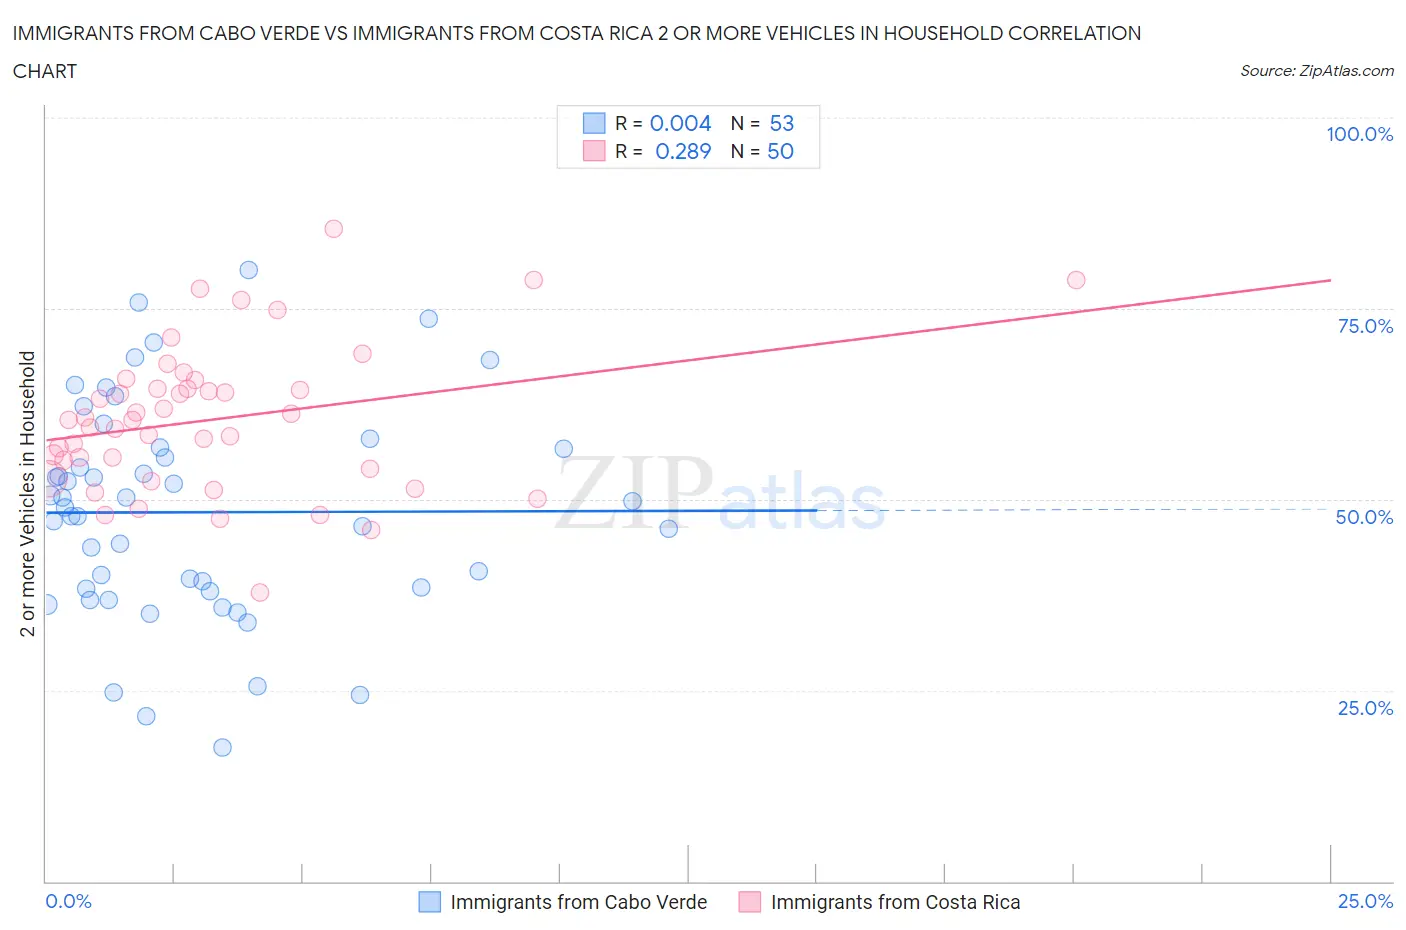 Immigrants from Cabo Verde vs Immigrants from Costa Rica 2 or more Vehicles in Household